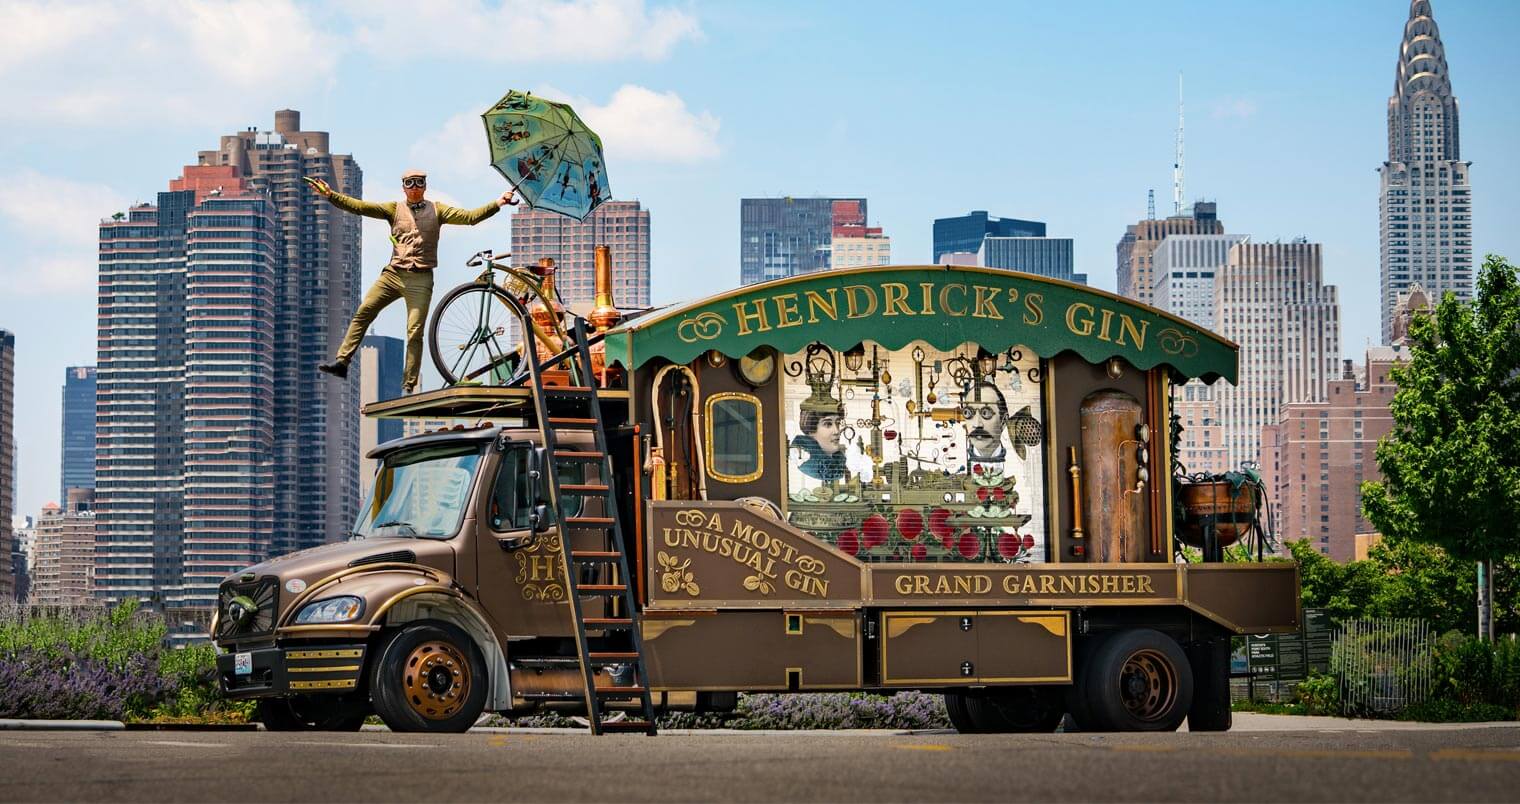 Hendrick's Gin to Cross America in a Giant Cucumber Garnisher, featured image